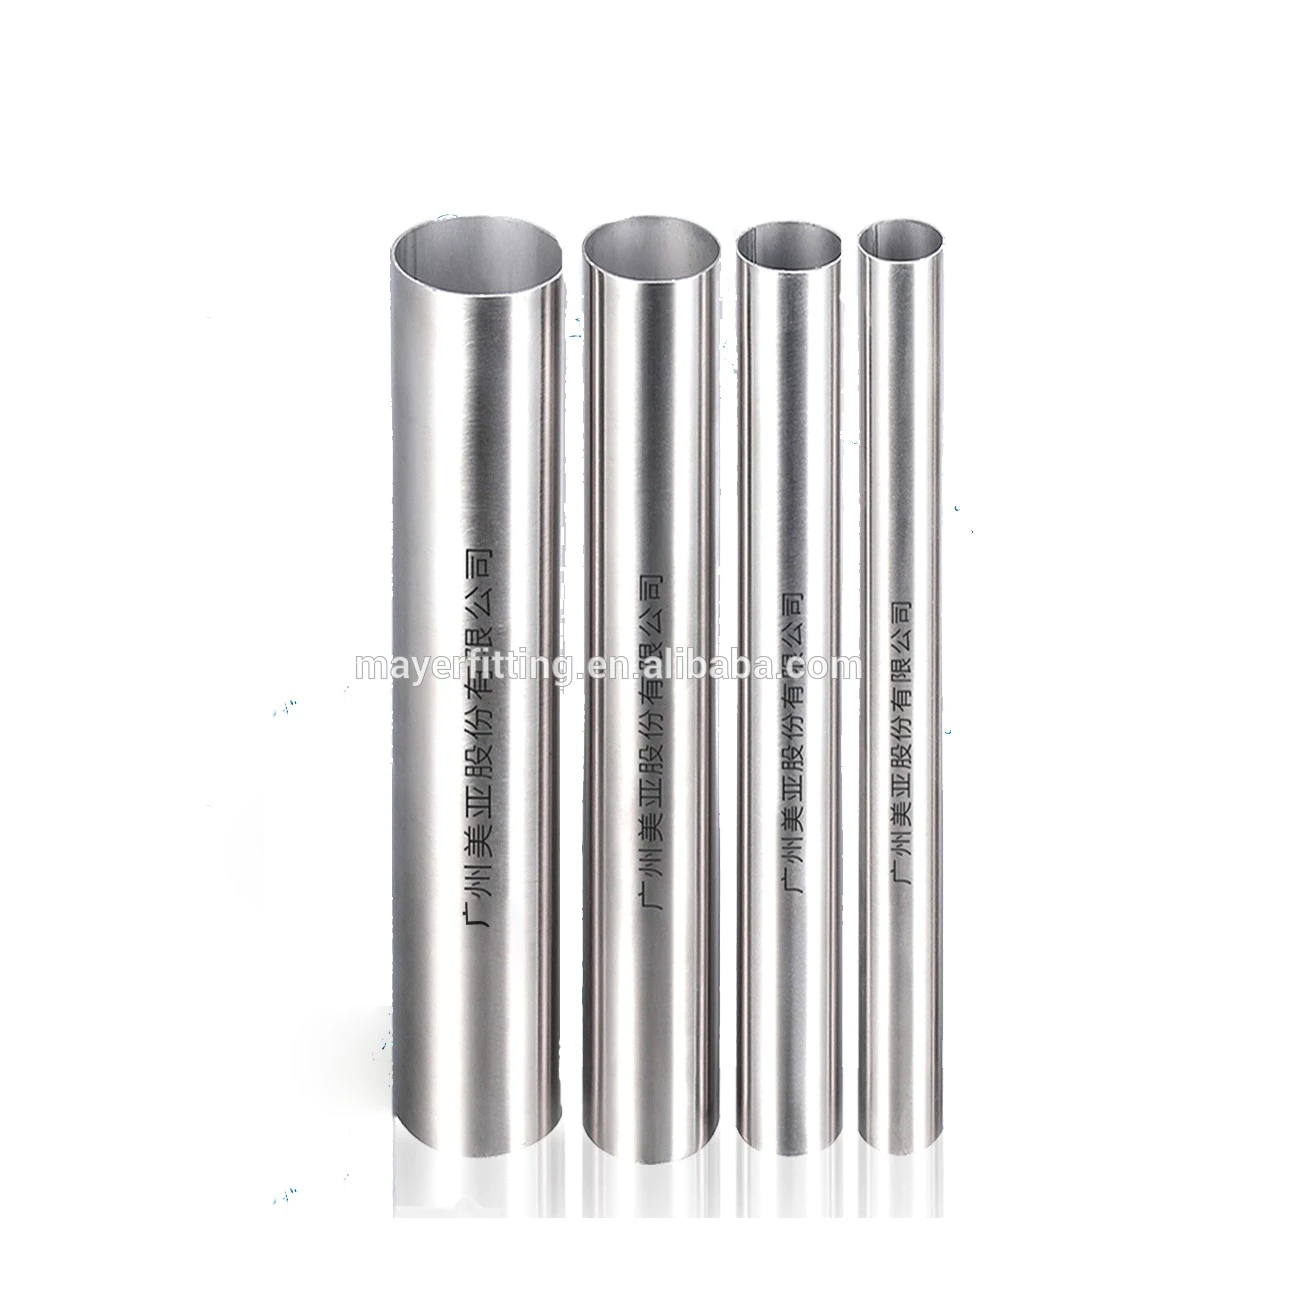 Stainless steel pipe 304/304L/316L/316, stainless steel round square pipe manufacturers